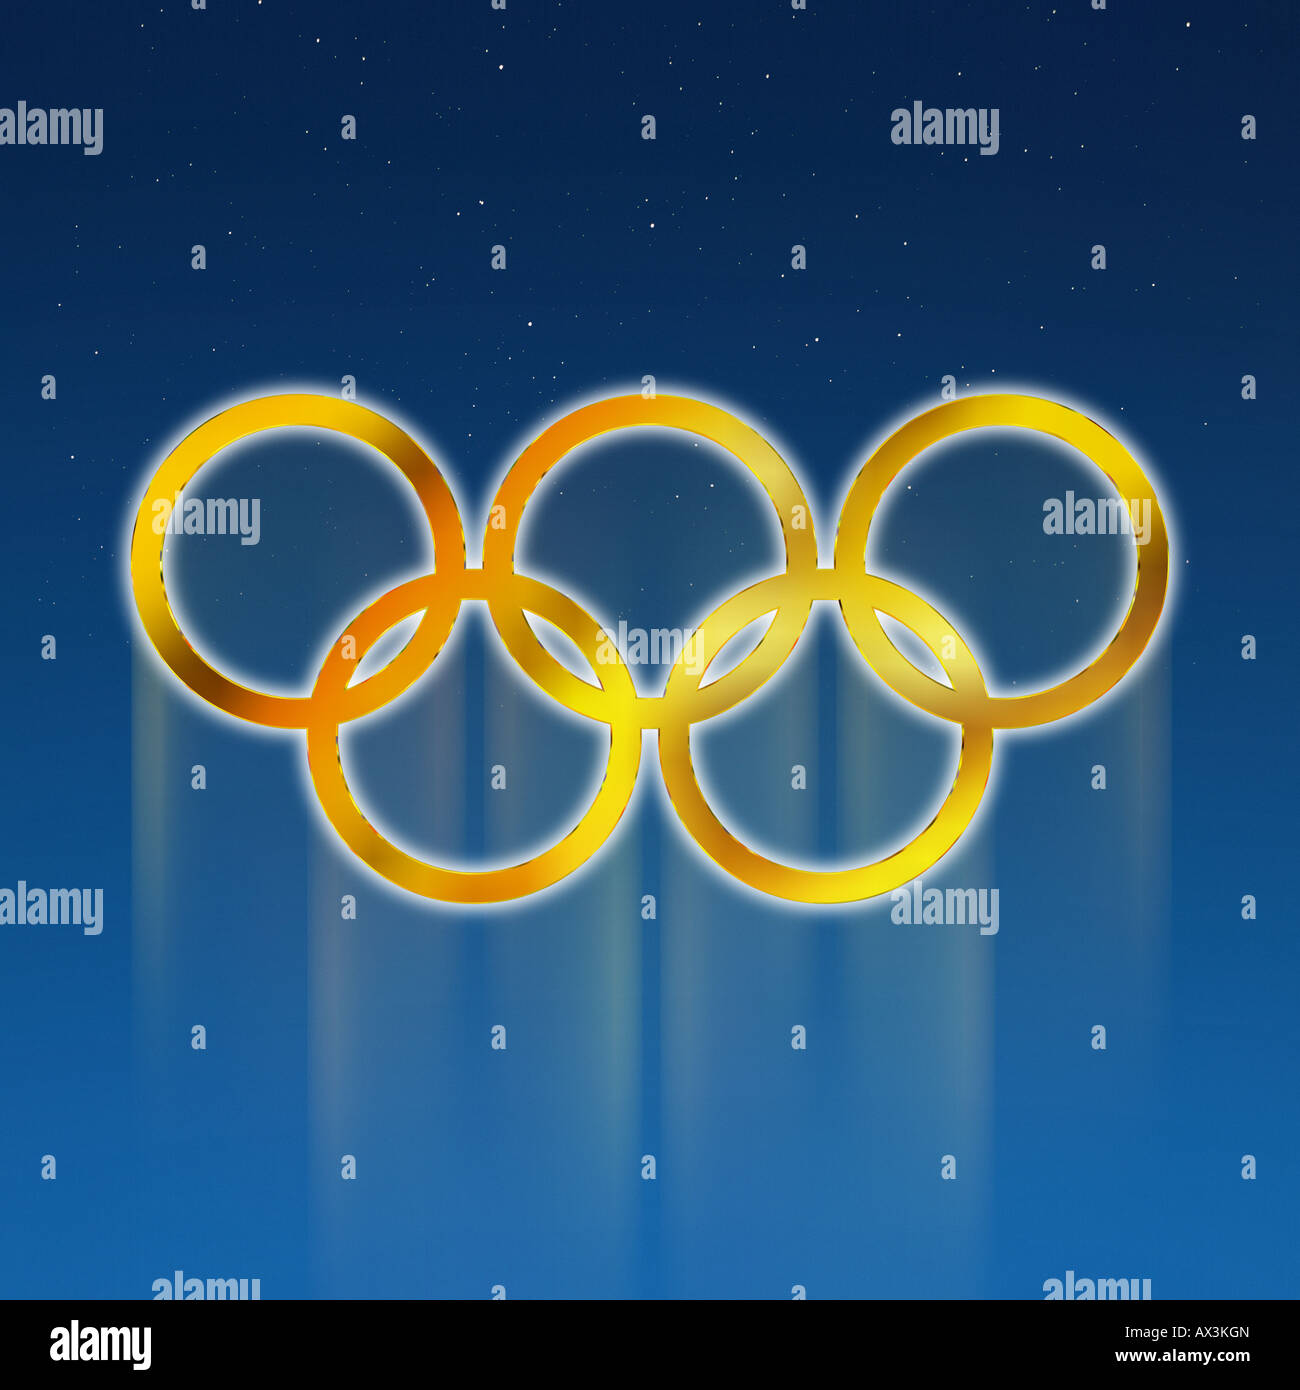 Golden olympic rings against deep blue gradated background Stock Photo